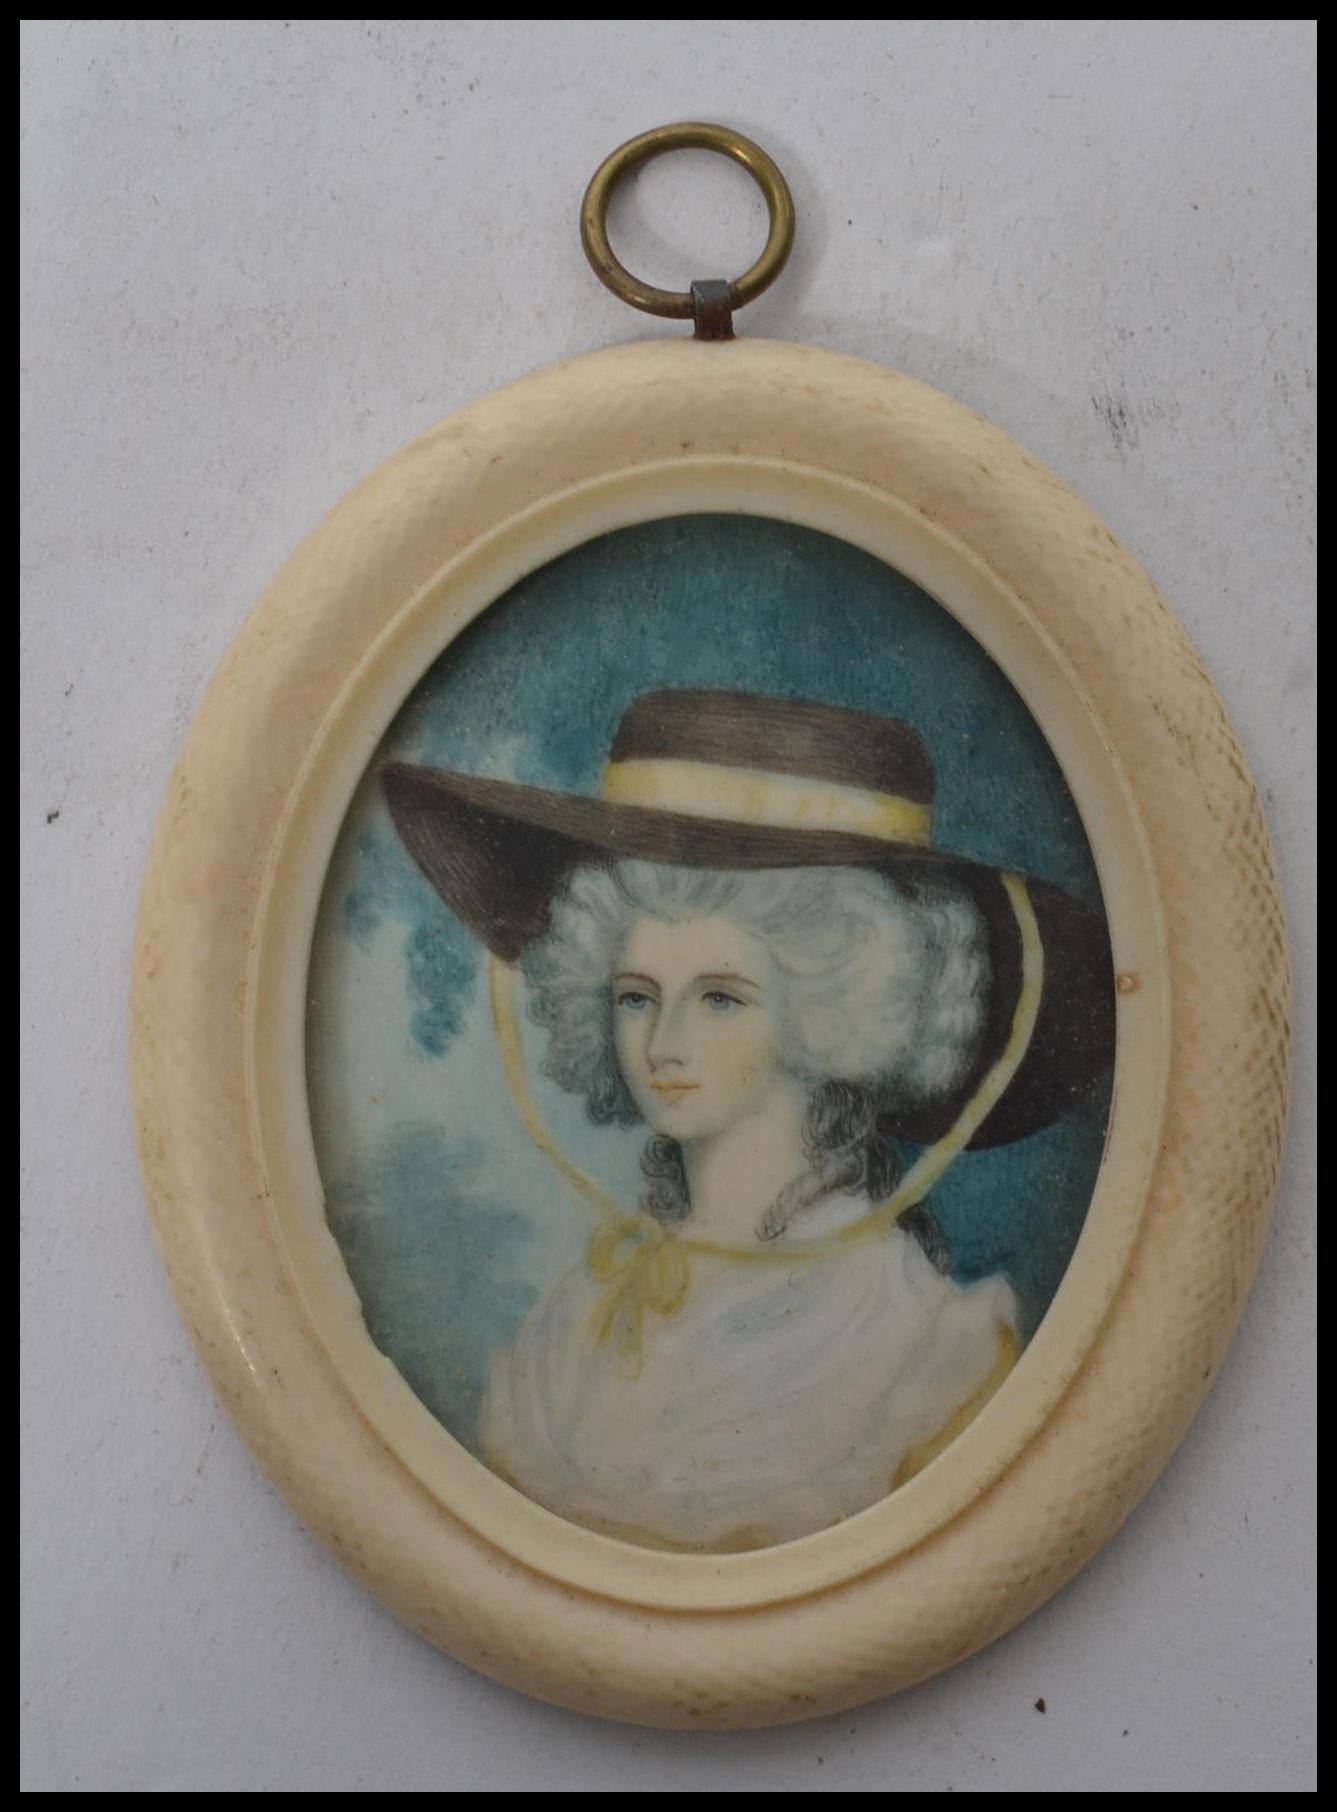 An 18th century portrait miniature painting on ivo